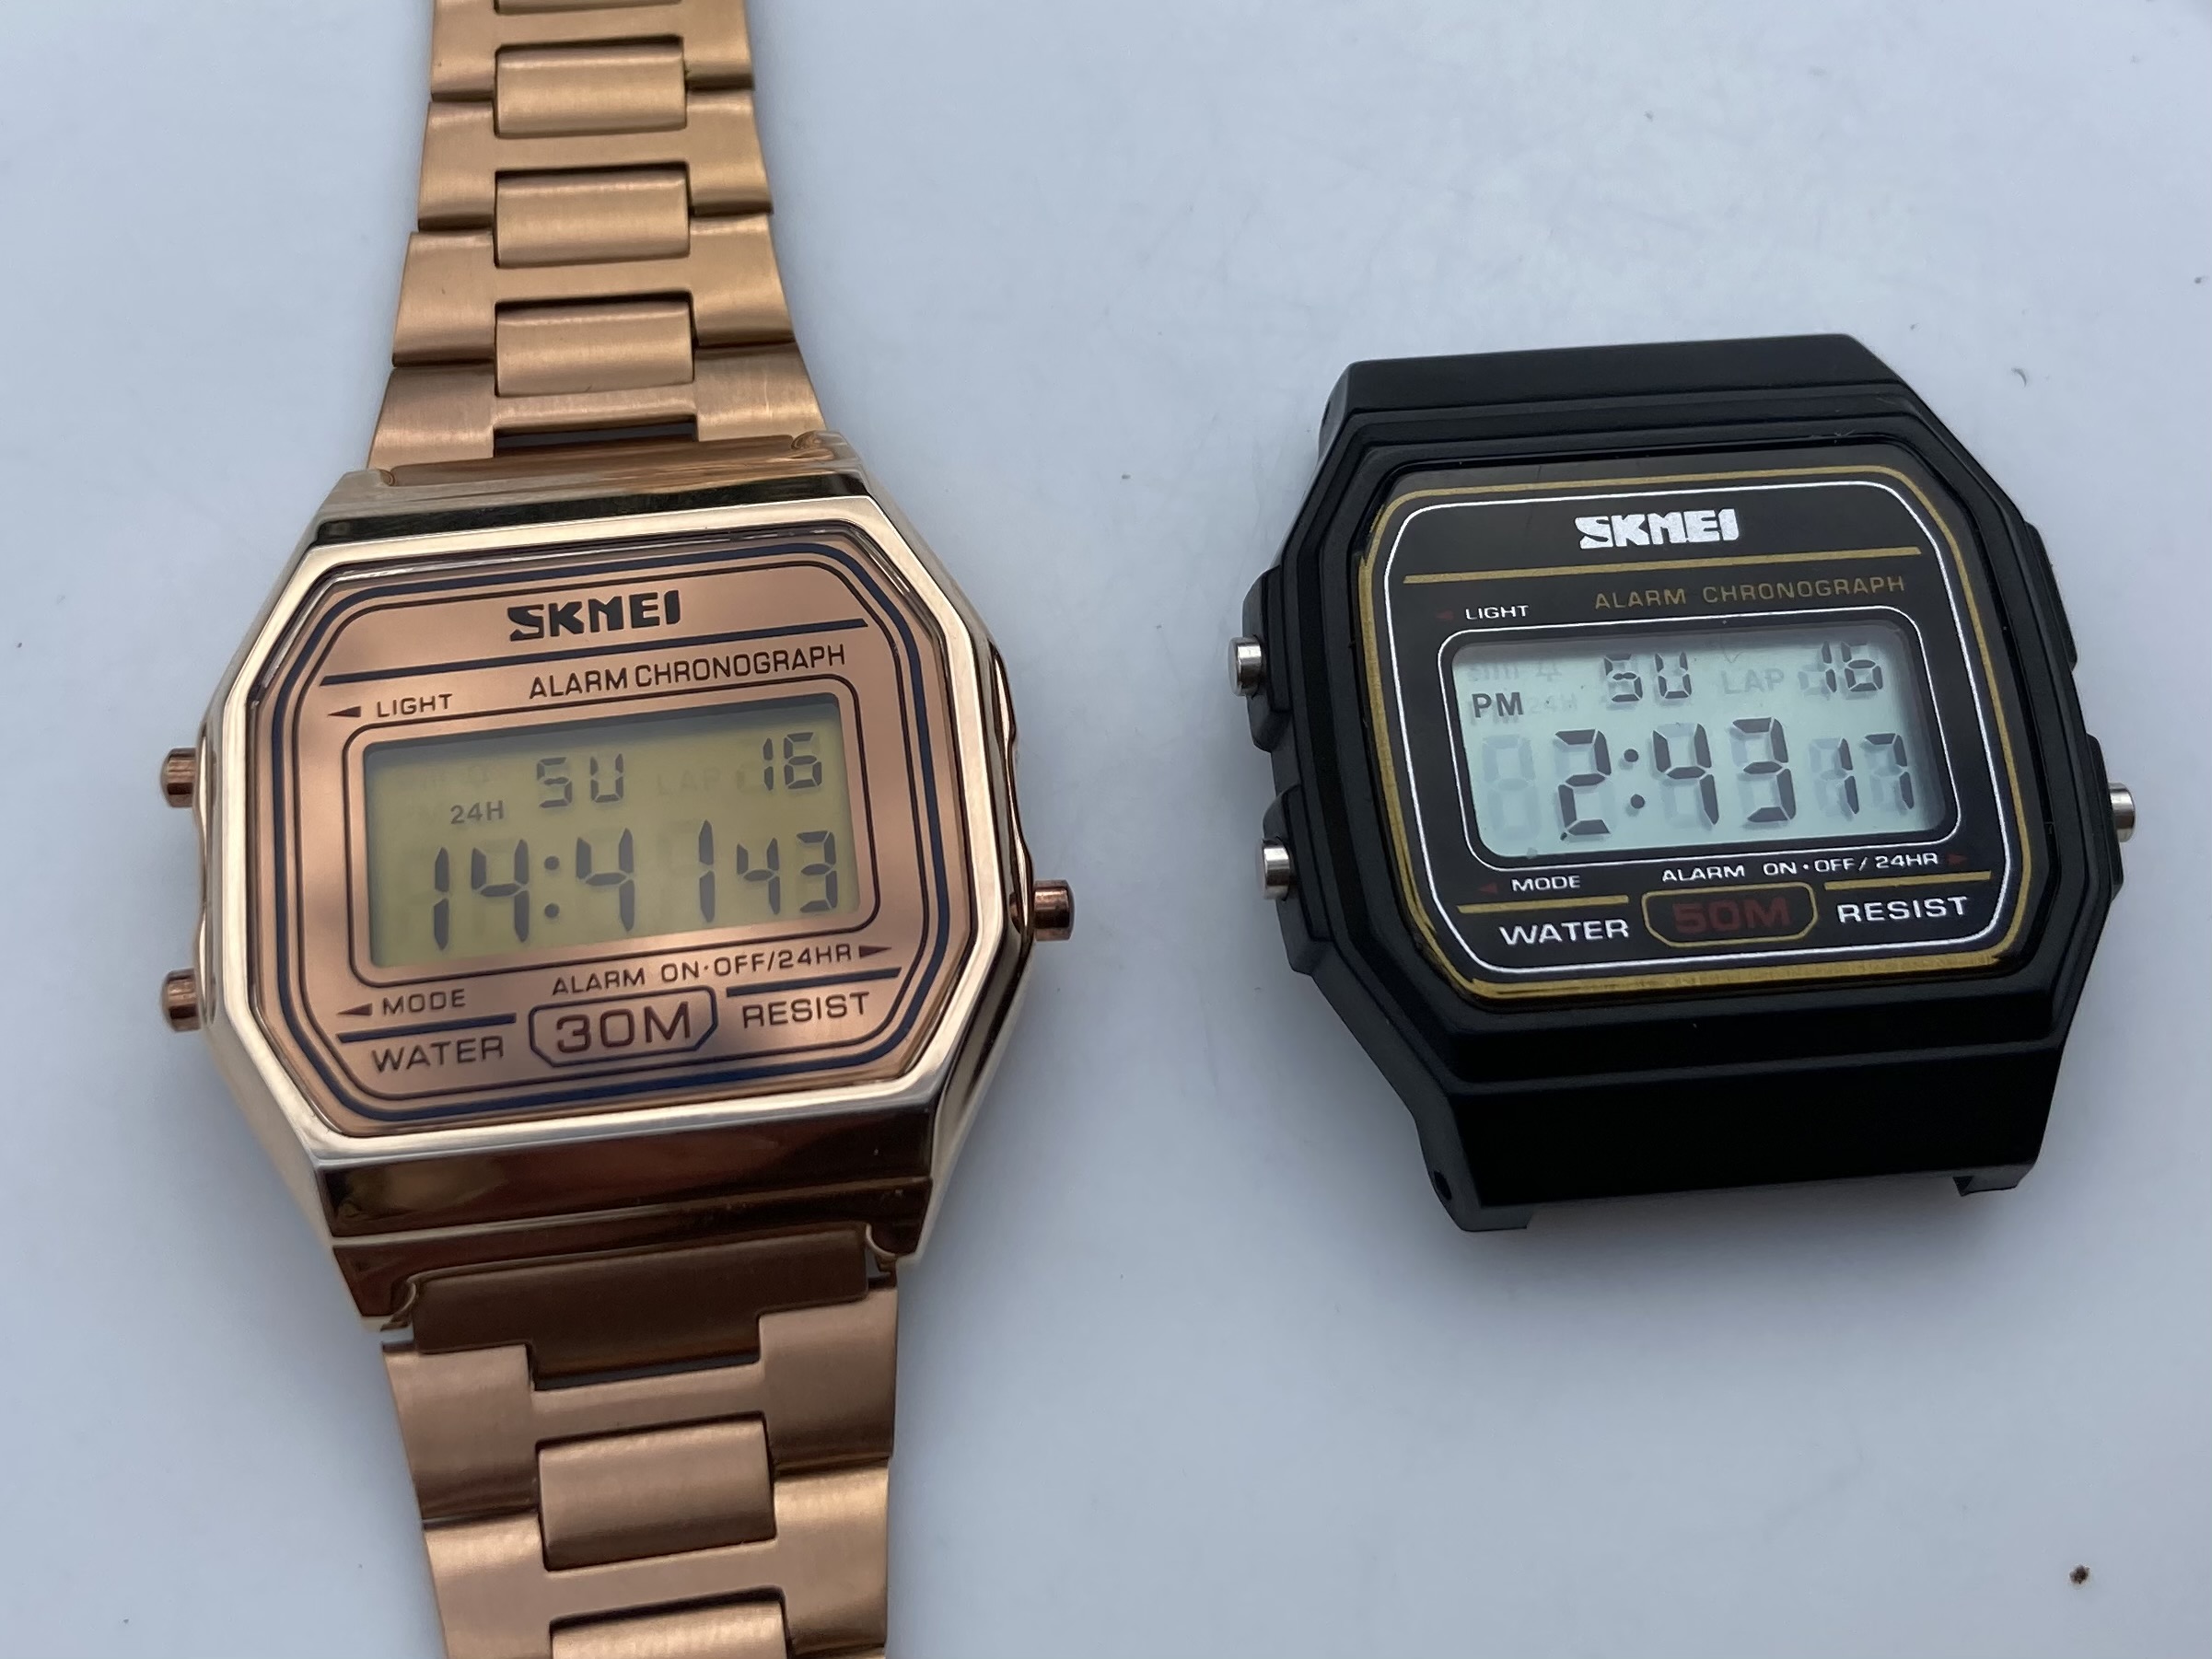 Skmei watches after swapping faces